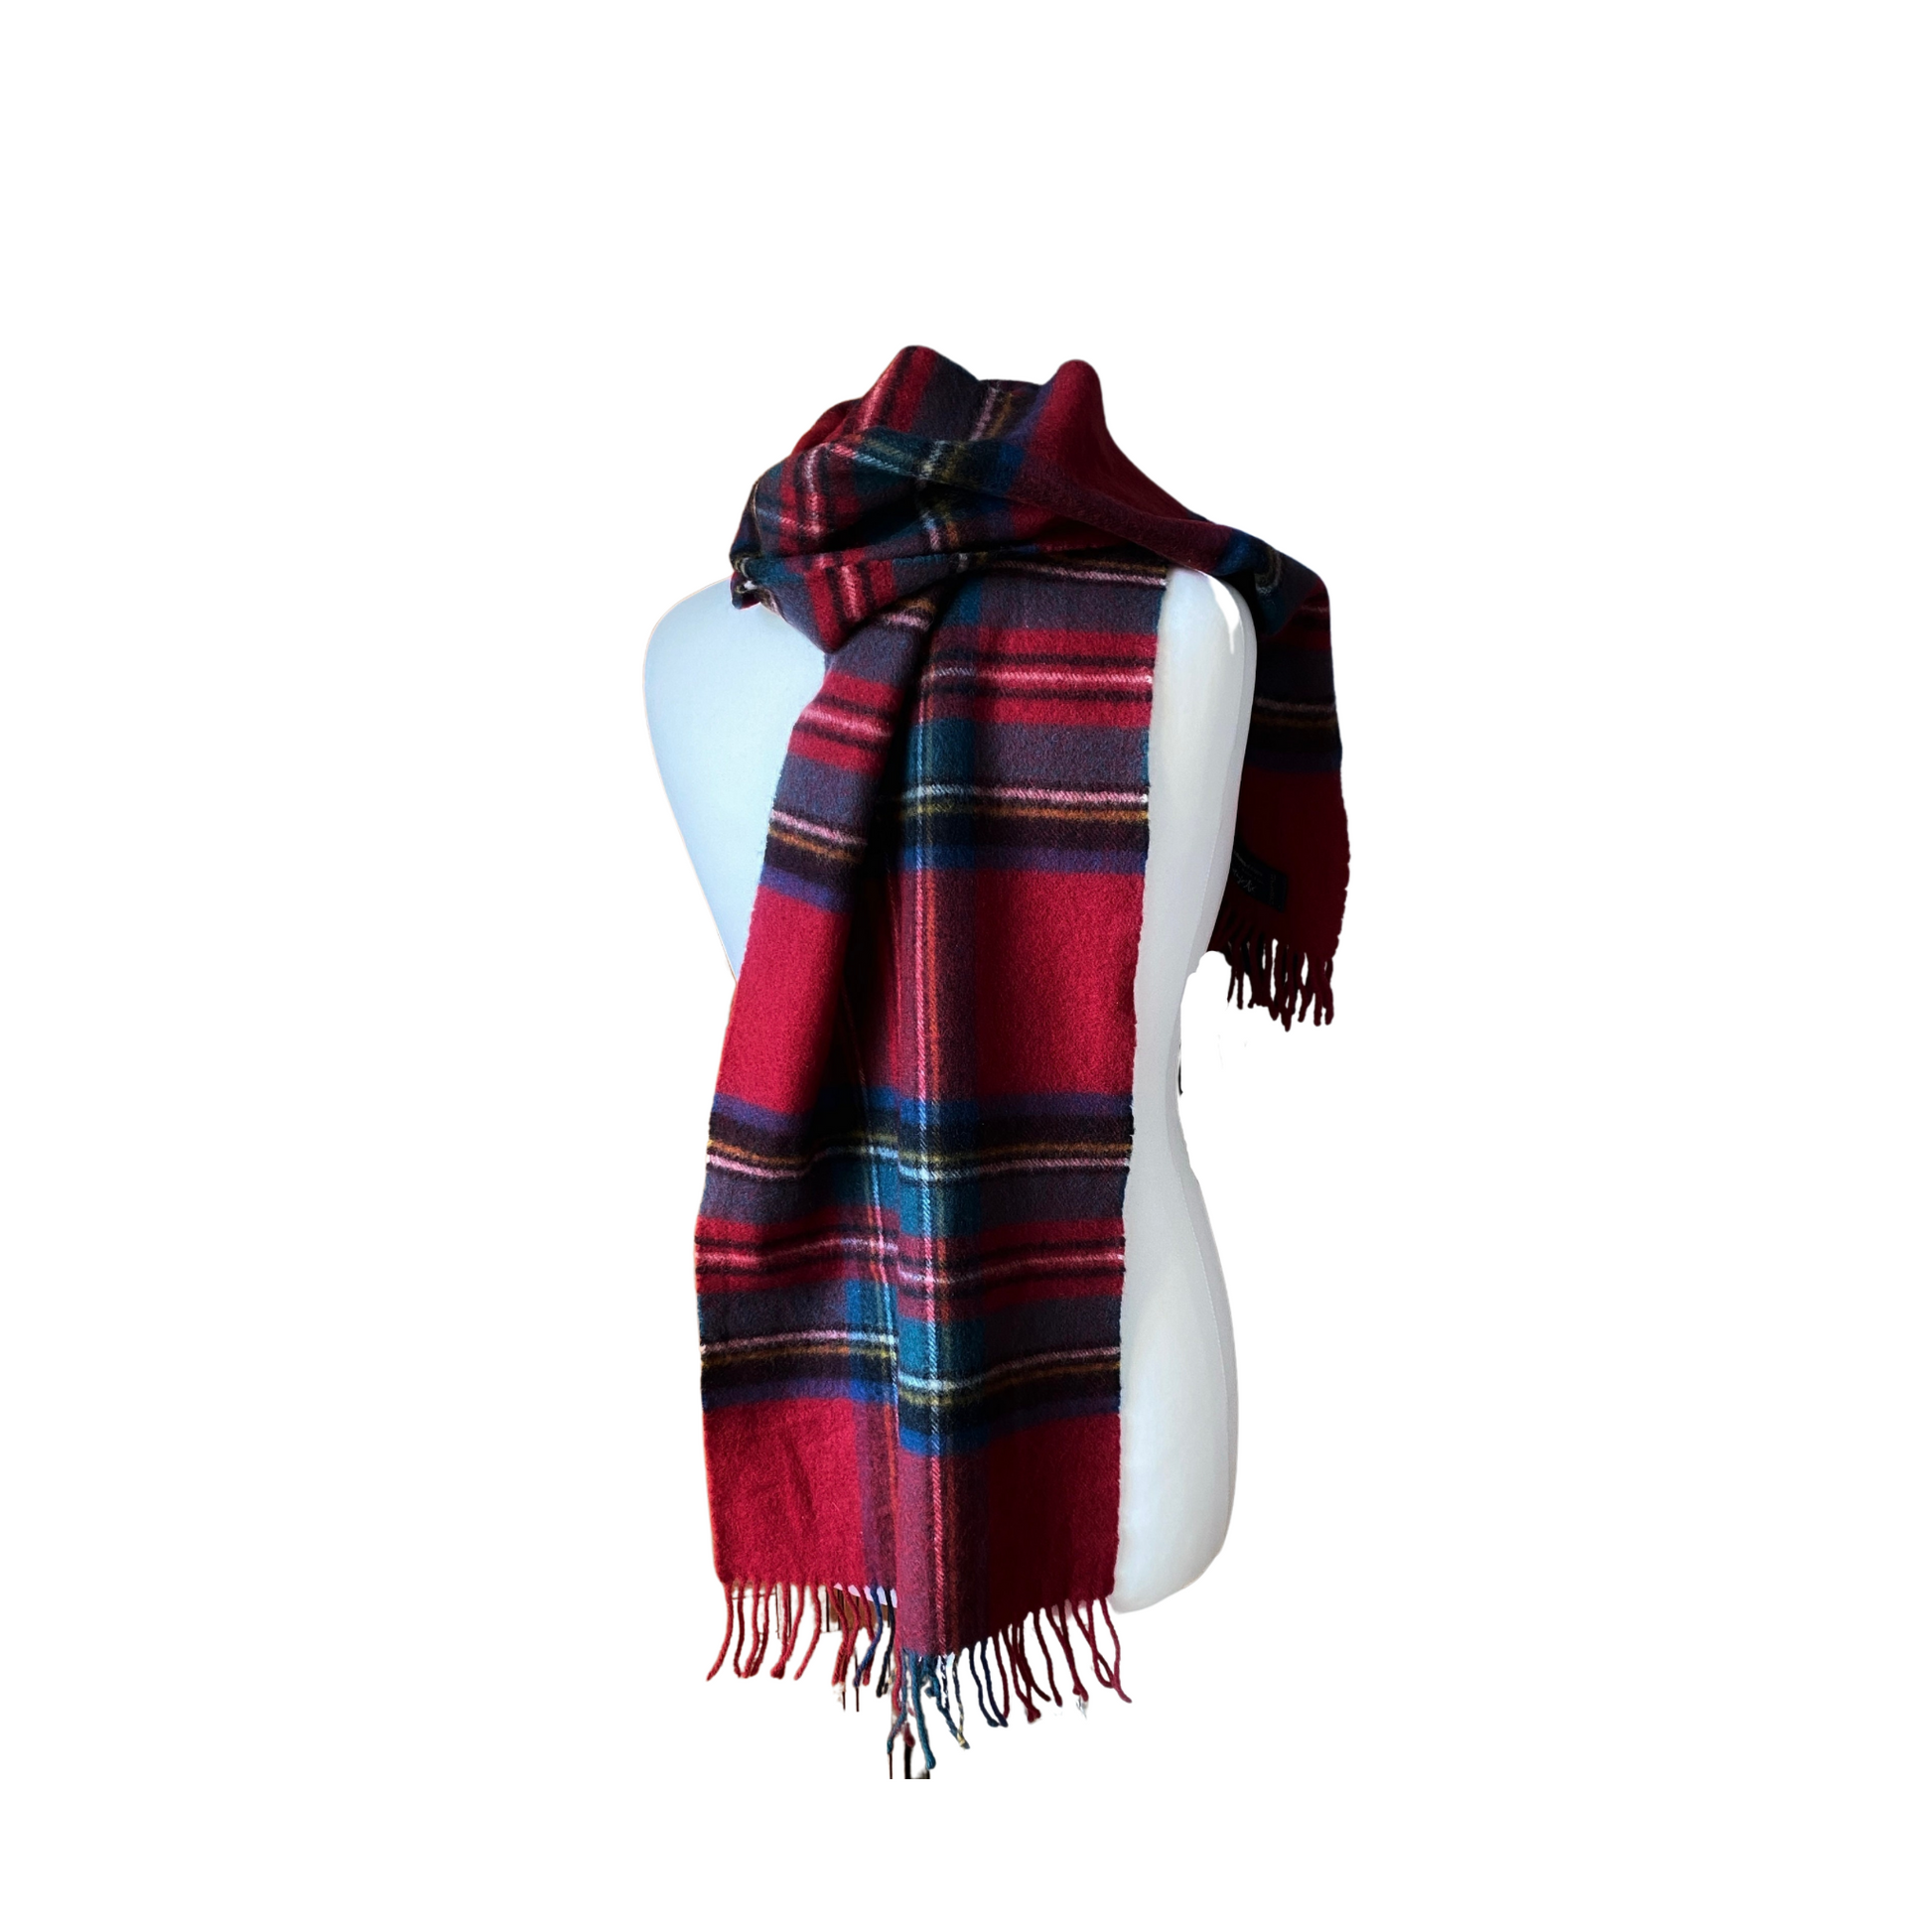 Made in Scotland - Authentic tartan scarf with fringing